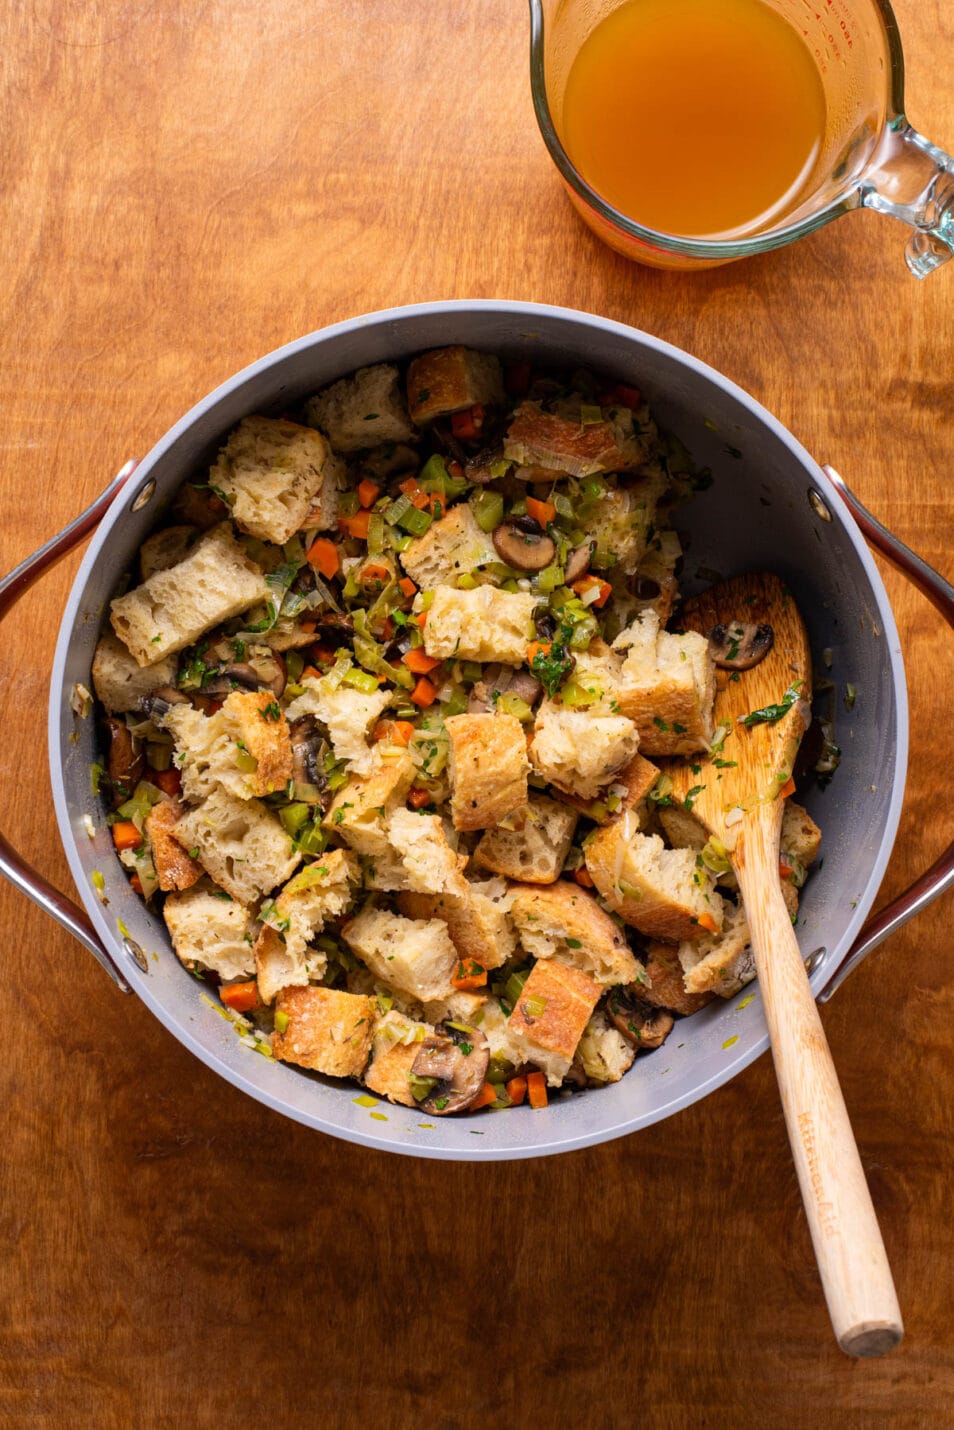 Combining stuffing ingredients in a Dutch oven.